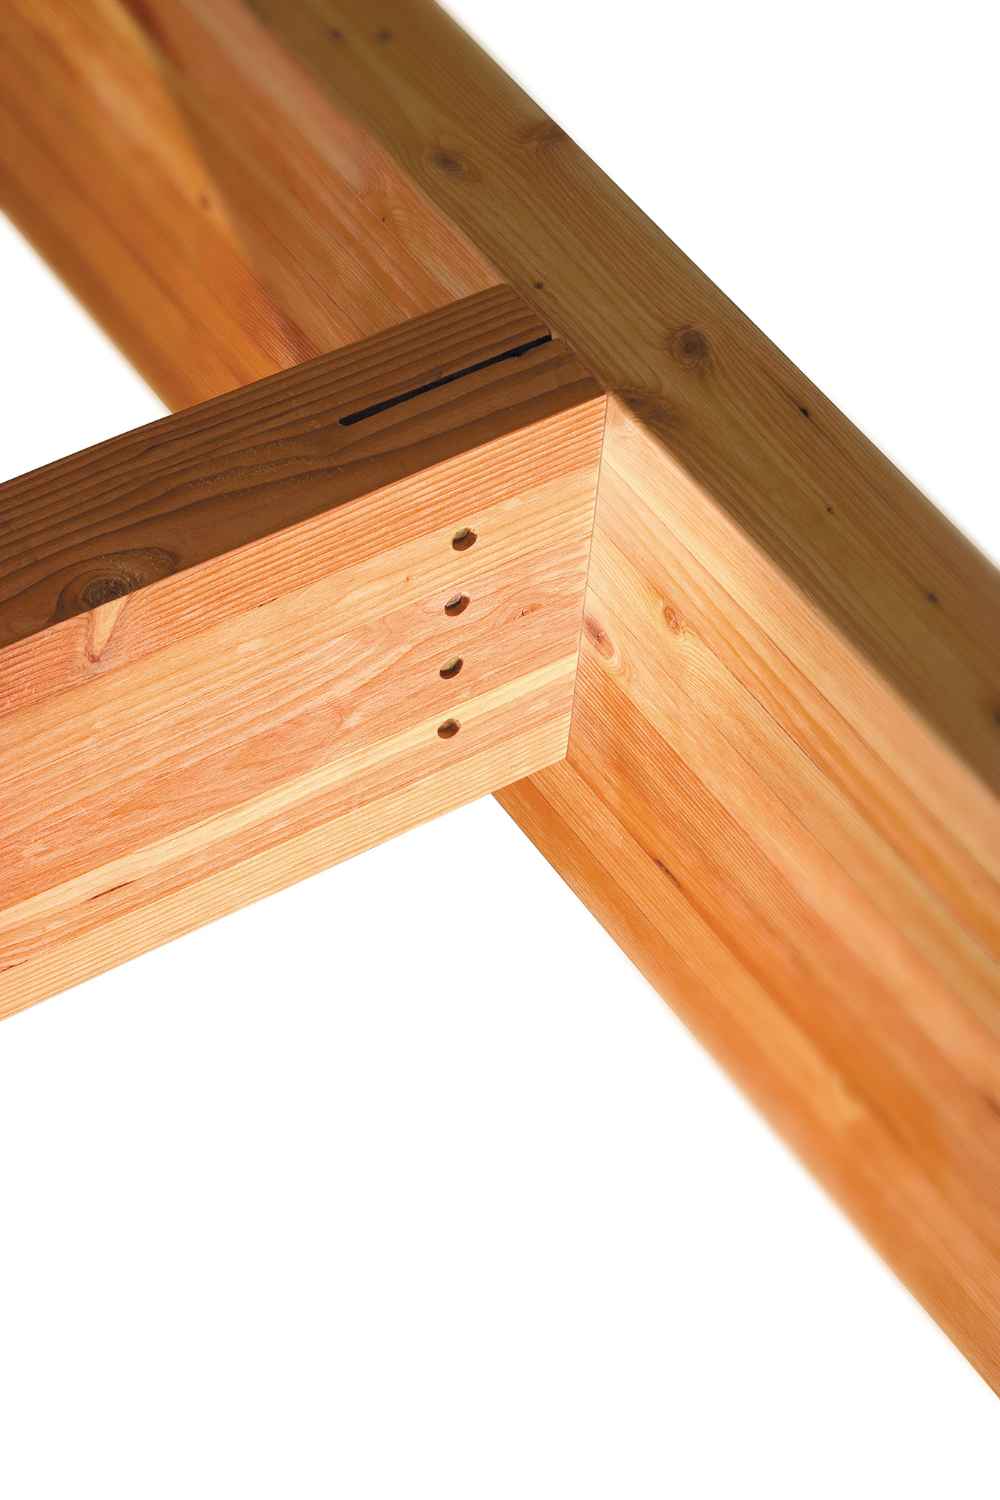 Simpson CJT5ZS Concealed Joist Tie w Short Pins ZMAX Finish image 4 of 5